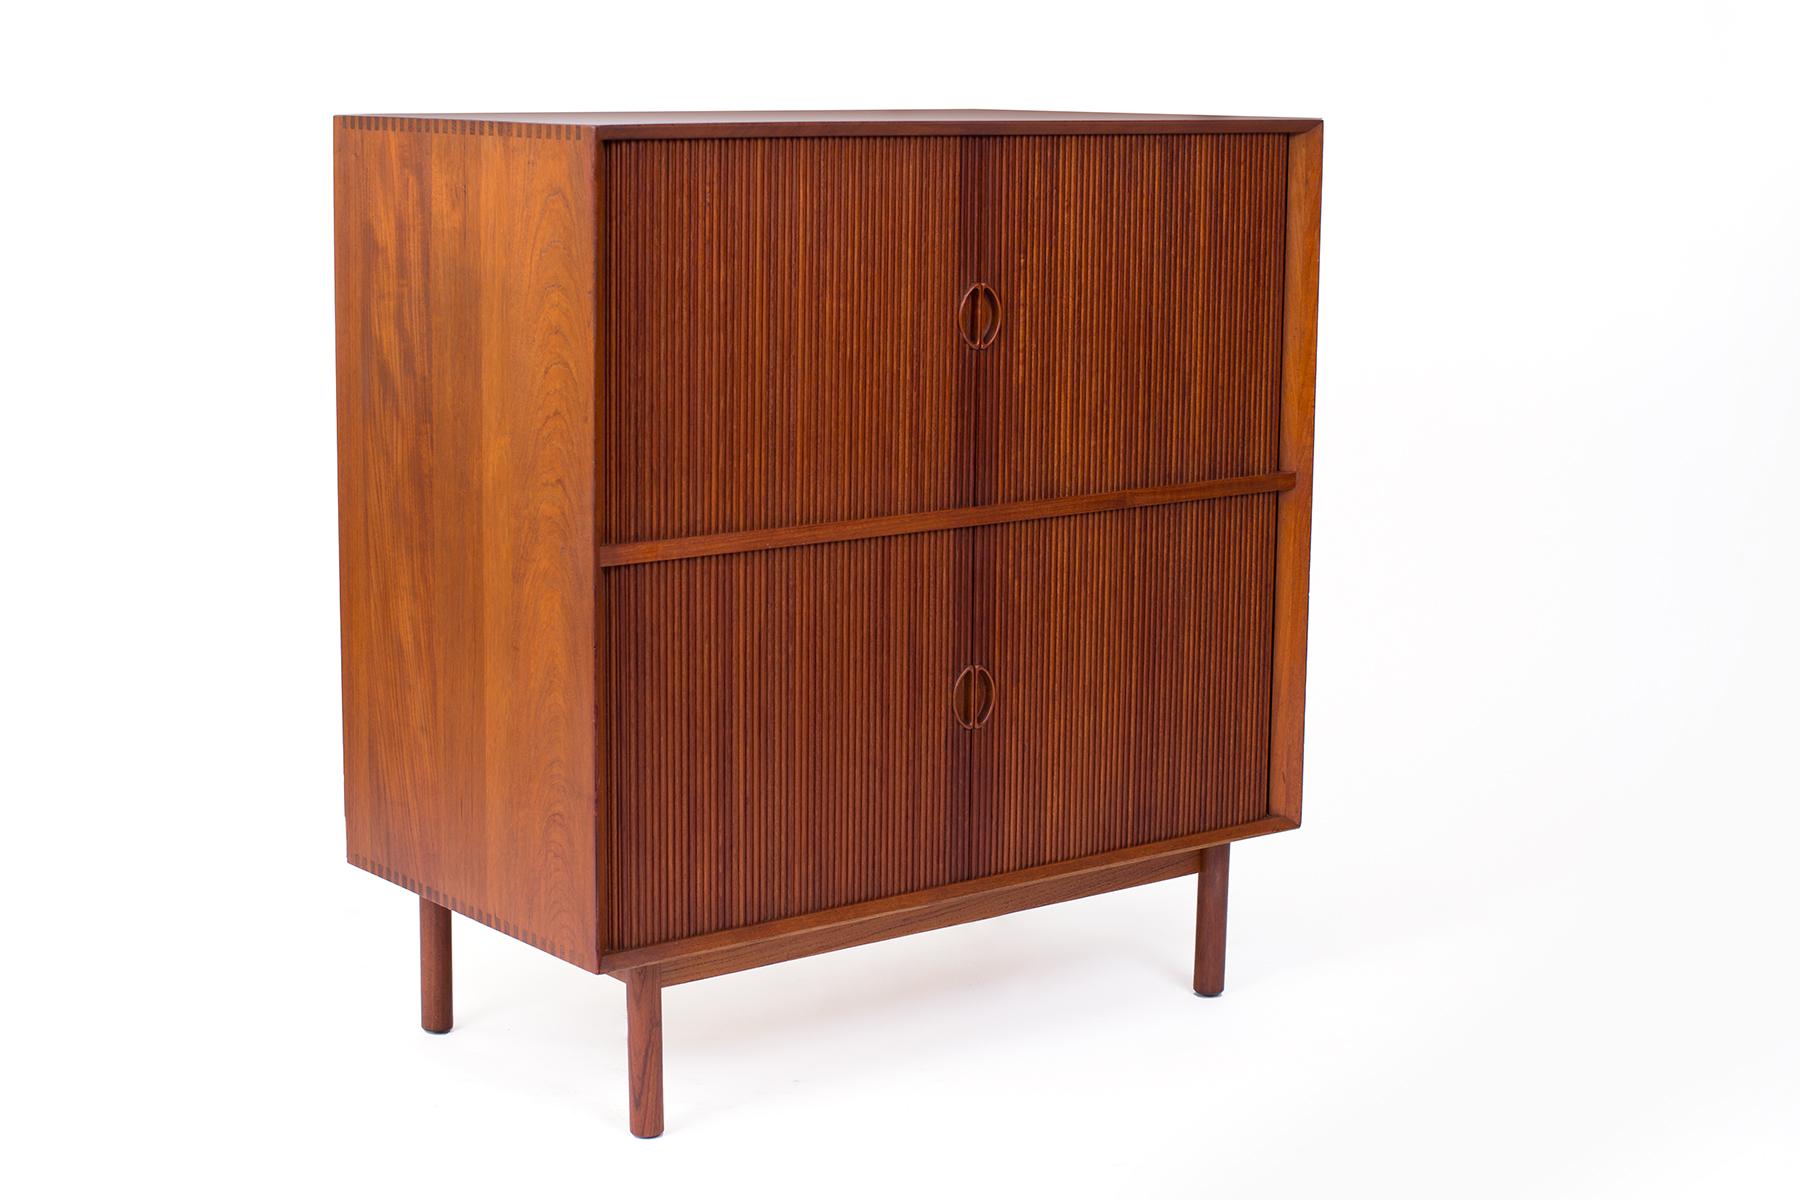 Peter Hvidt and Orla Mølgaard Nielsen teak chest, circa late 1950s. This all original example has exposed finger joints and is solid teak. The top and bottom have tambour doors.